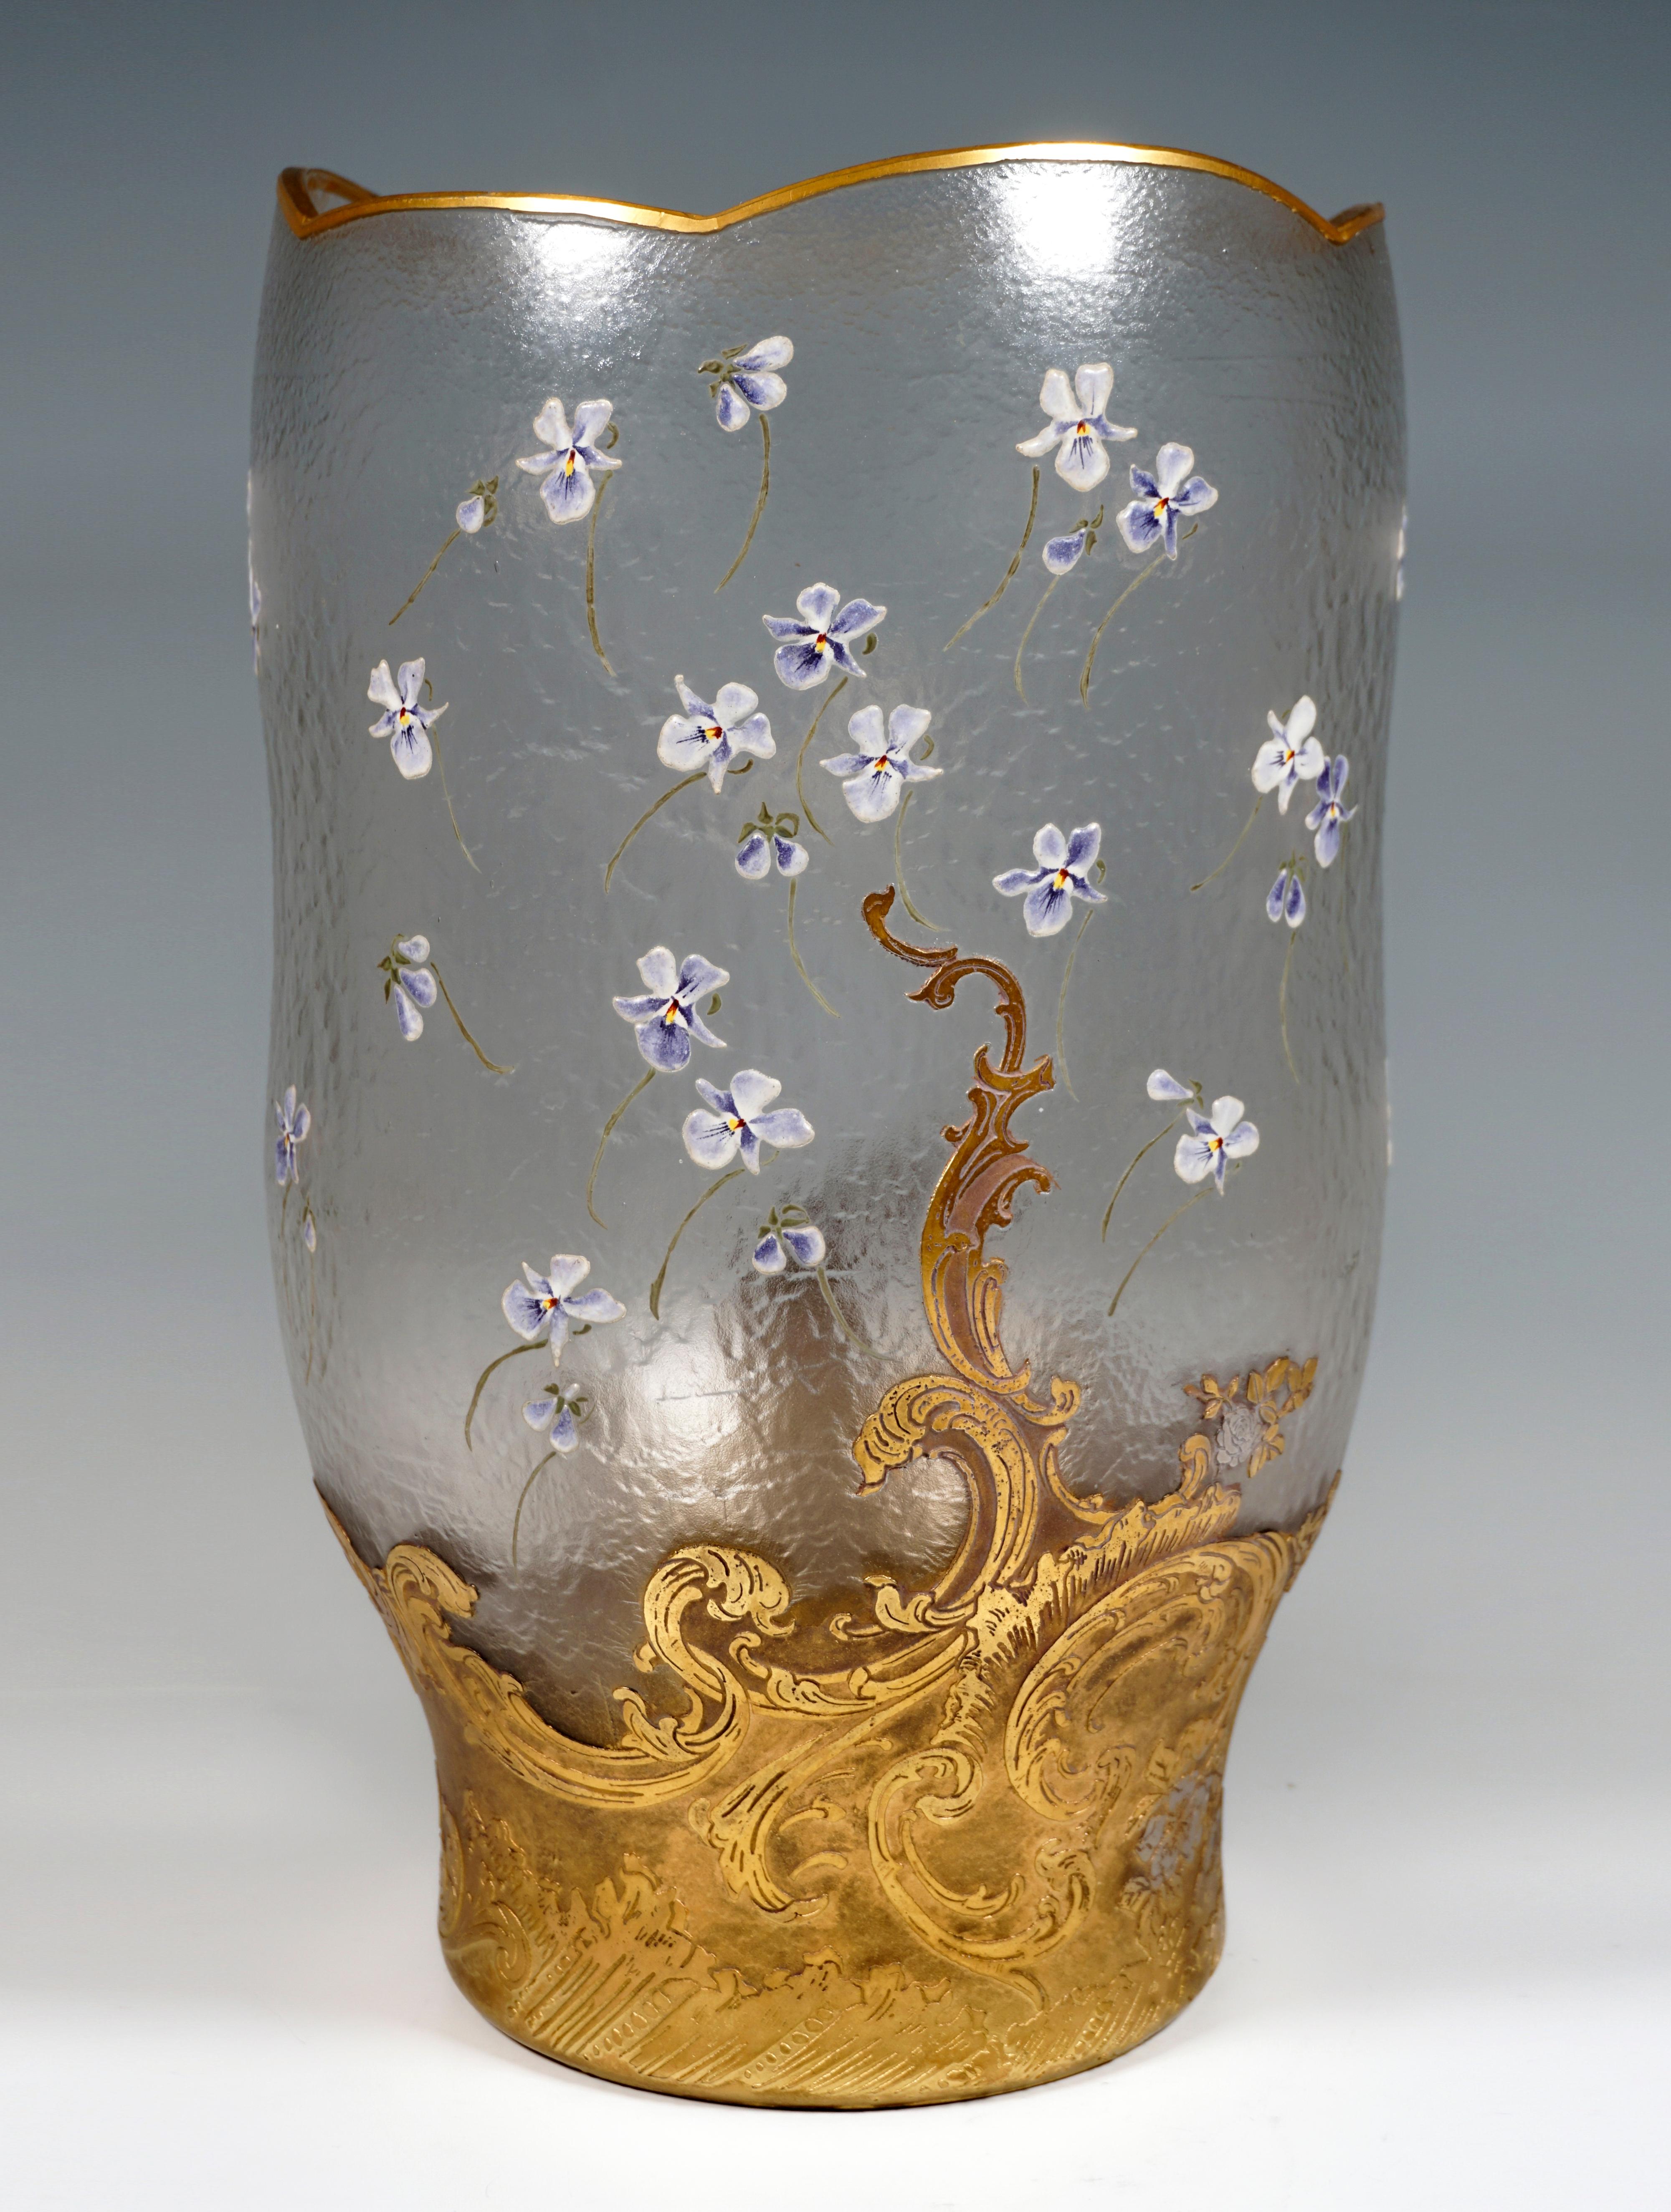 Large vase made of colorless glass on a round, flush stand, after a straight foot zone, bulbous, expanding into irregular, slightly wavy walls, surface etched in relief, polished, gilded mouth rim with six wavy arches of different heights, violets